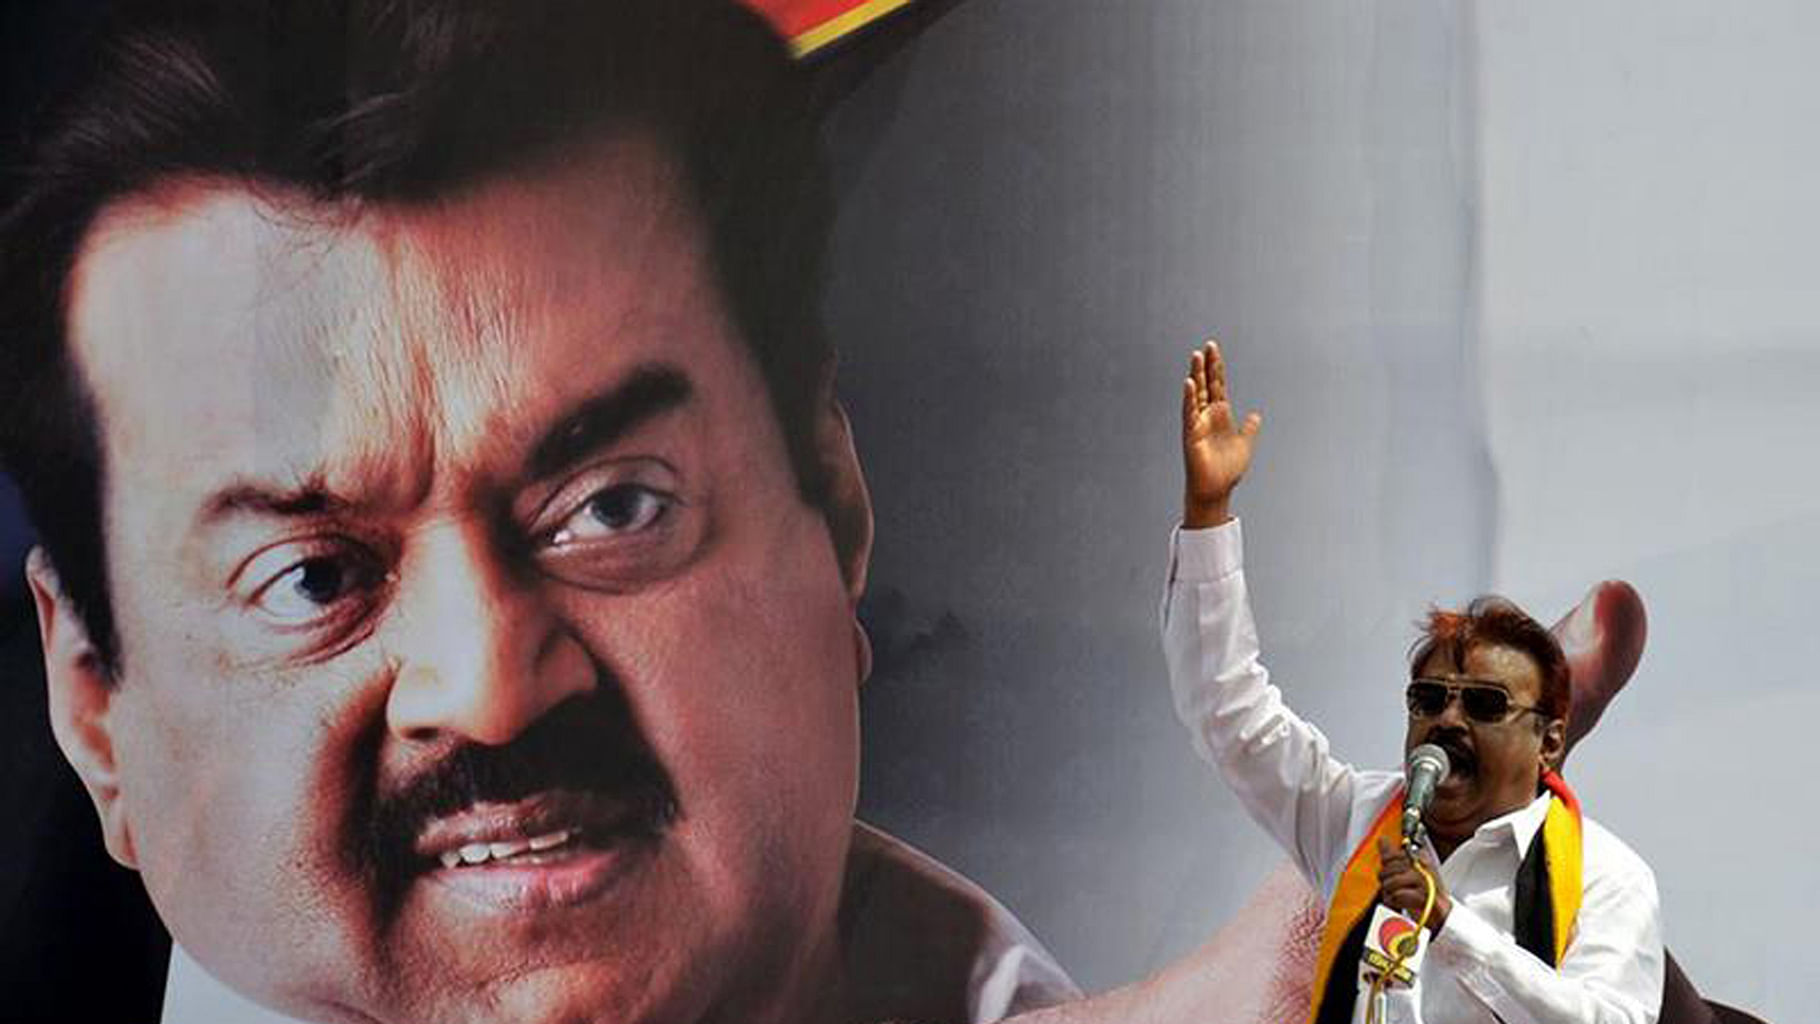 Vijaykanth speaking at a rally. (Photo: The News Minute)